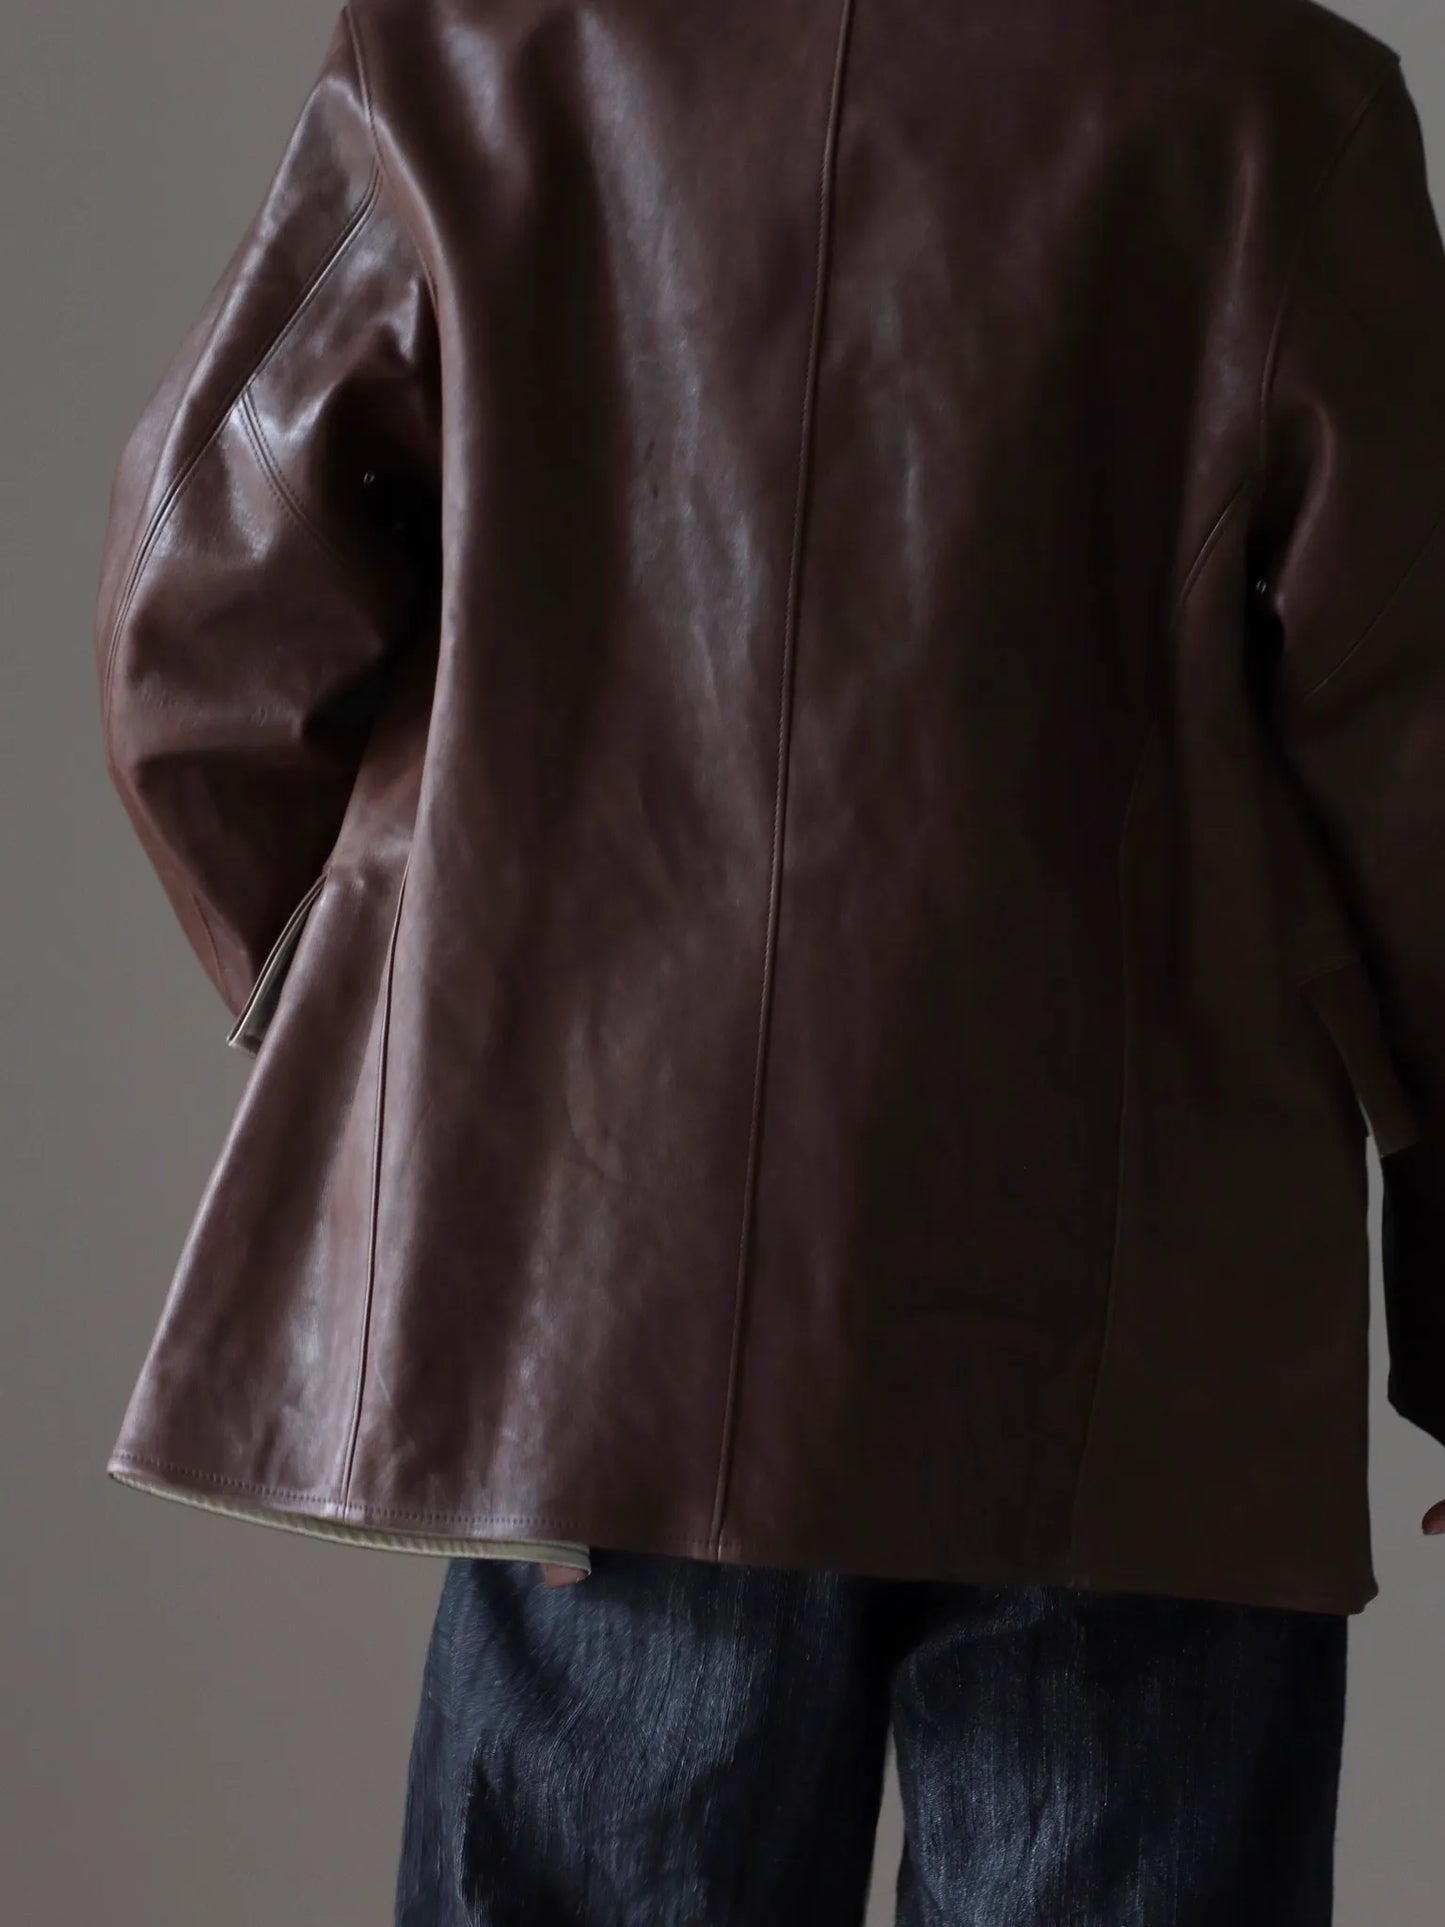 t-t-sack-leather-coat-mud-dyed-brown-7